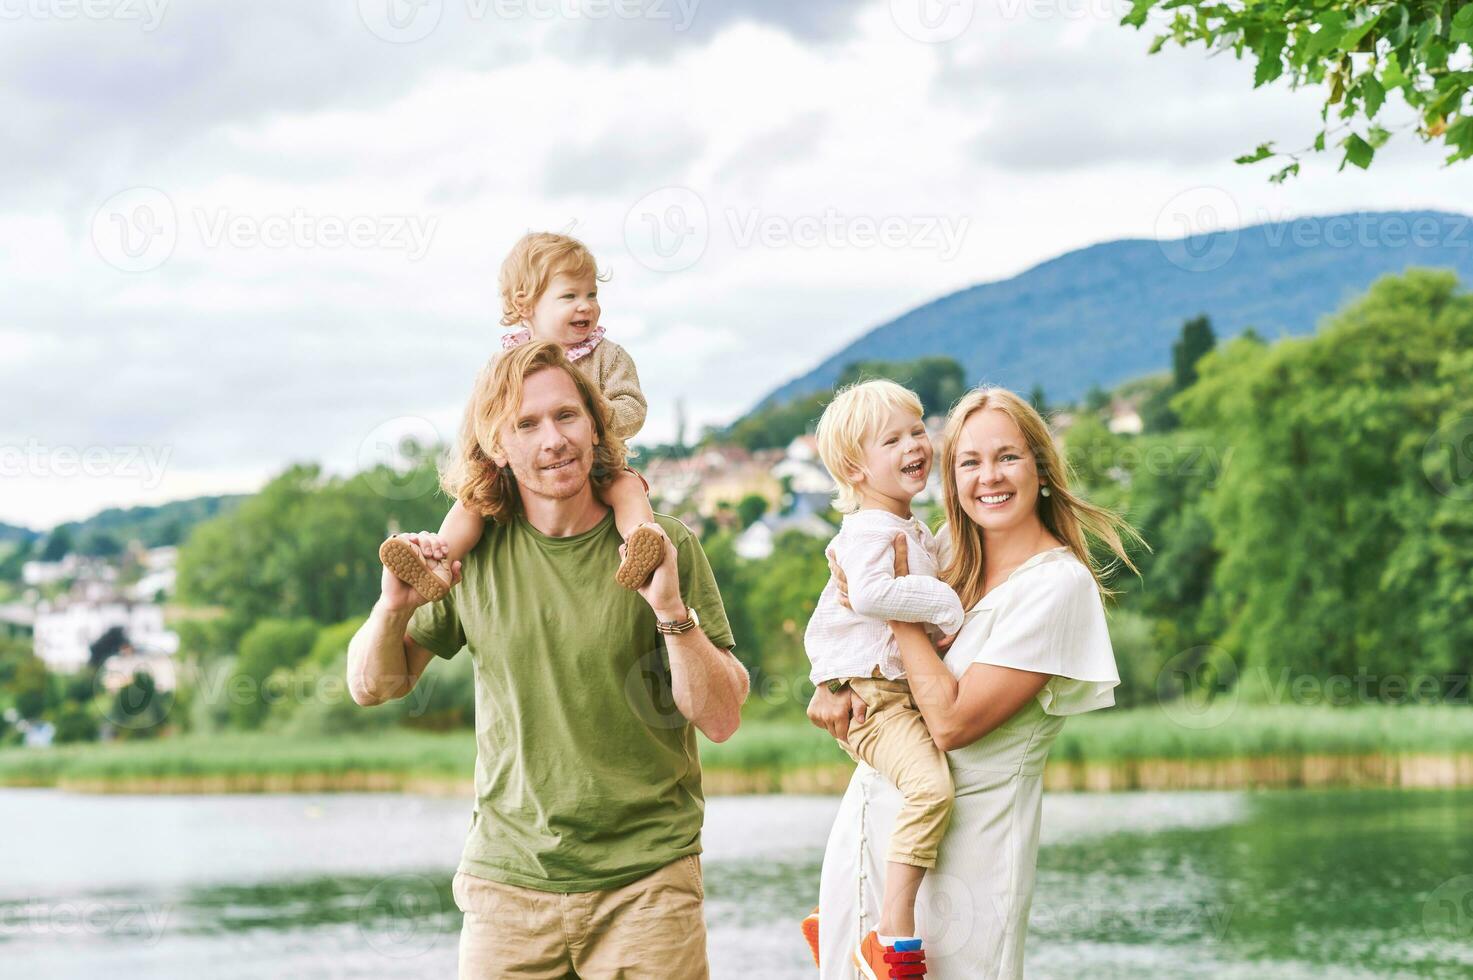 Outdoor portrait of beautiful family, young couple with preschooler boy and toddler girl posing next to lake or river photo